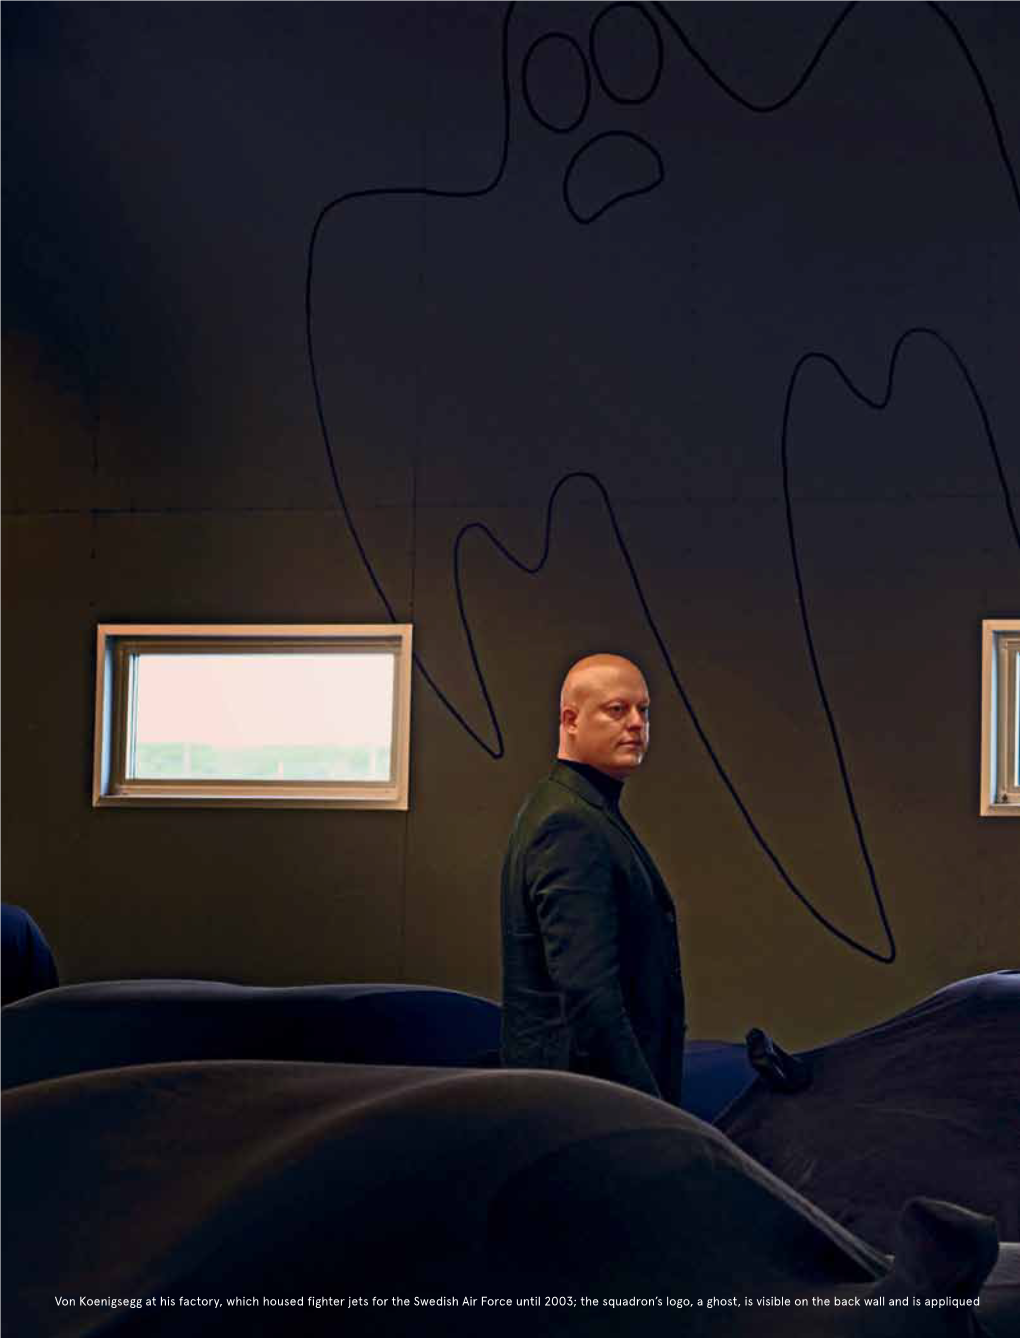 Von Koenigsegg at His Factory, Which Housed Fighter Jets for the Swedish Air Force Until 2003